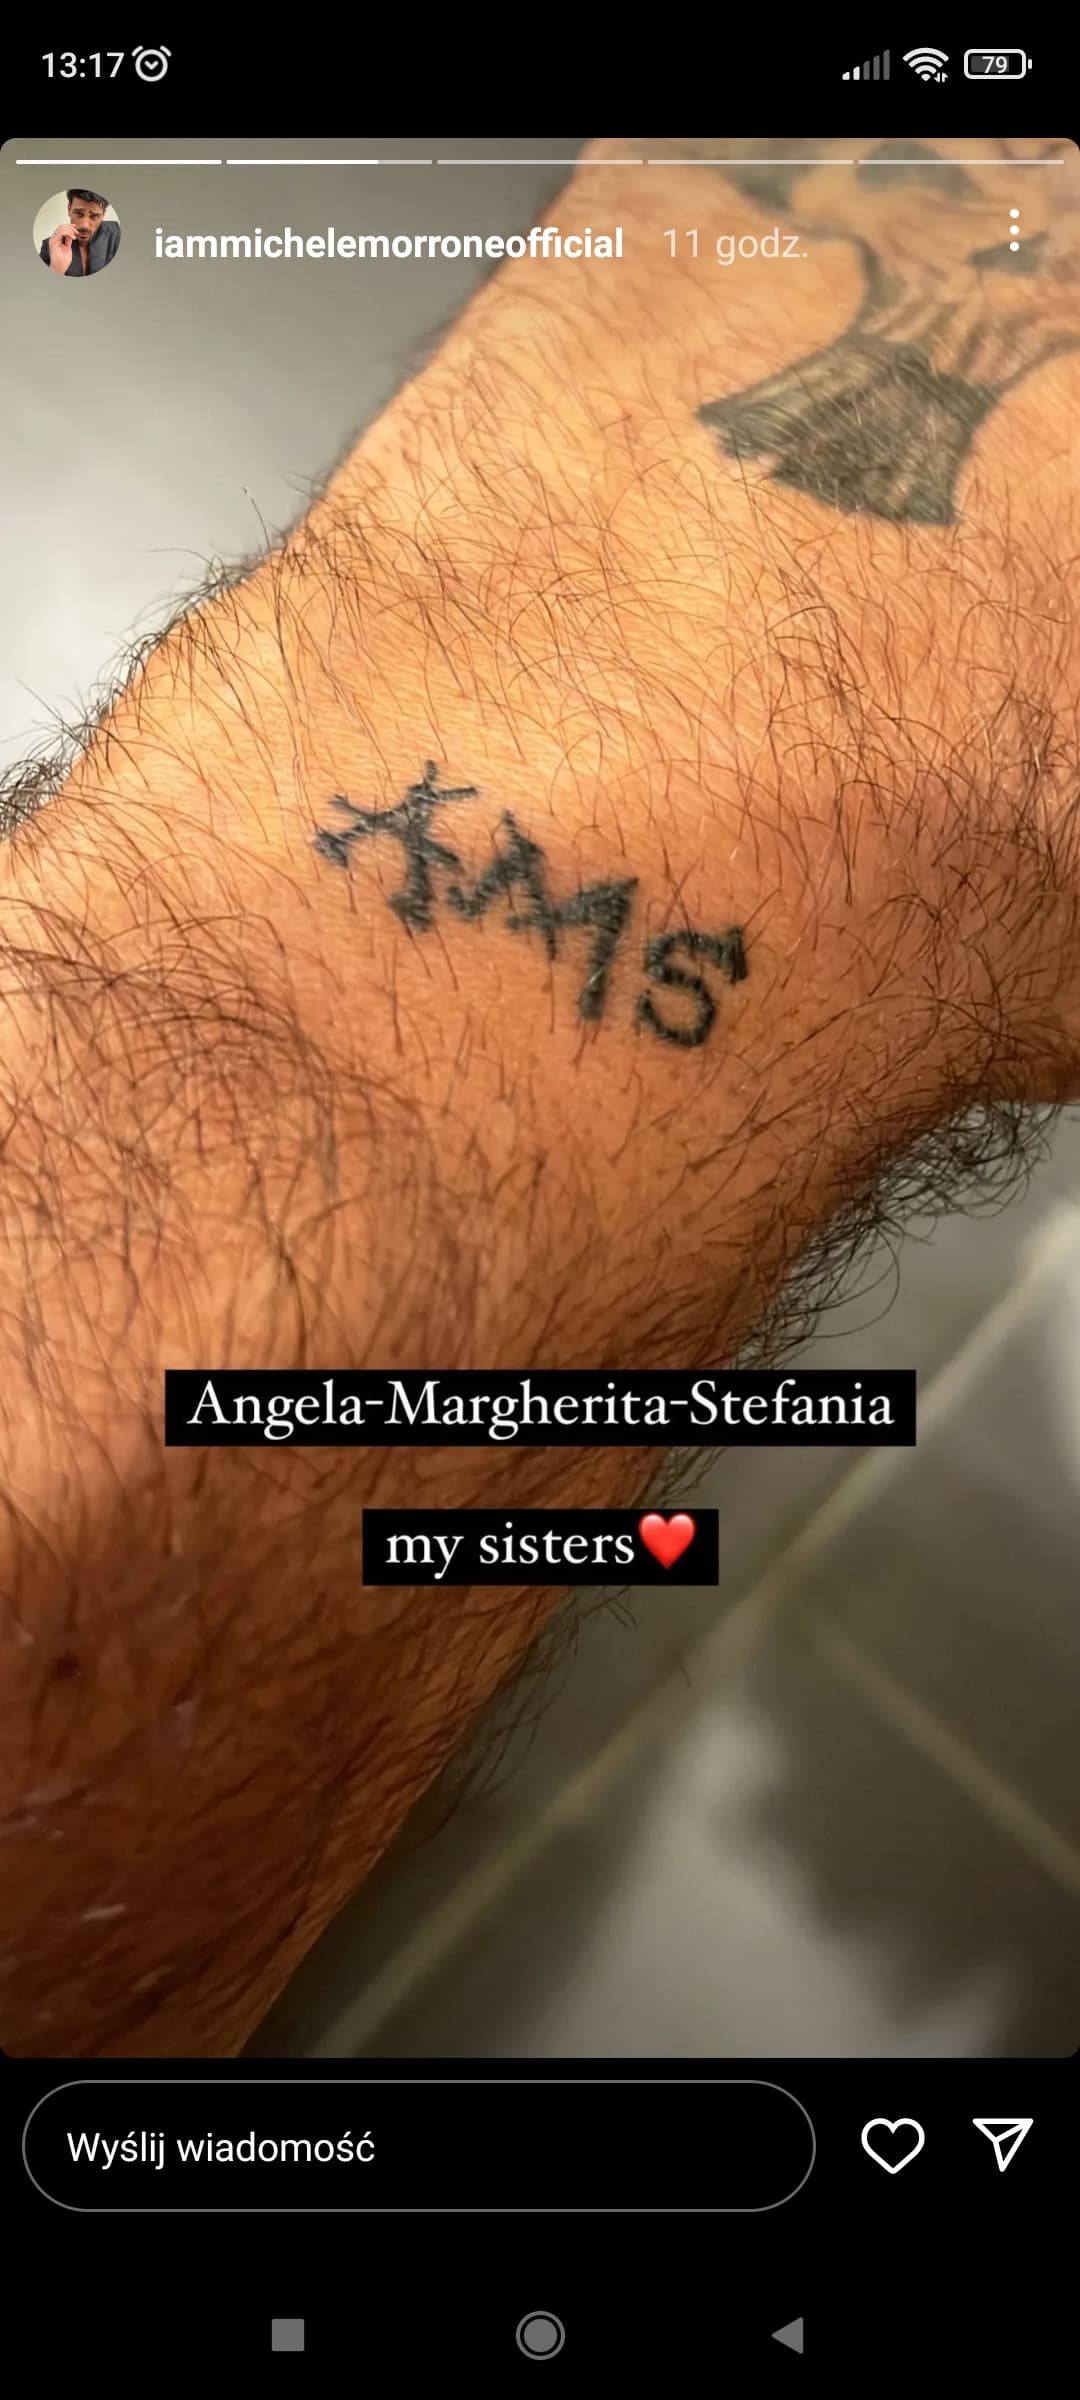 Michele Morrone on the AMS tattoo. However, this is not about Anna ...